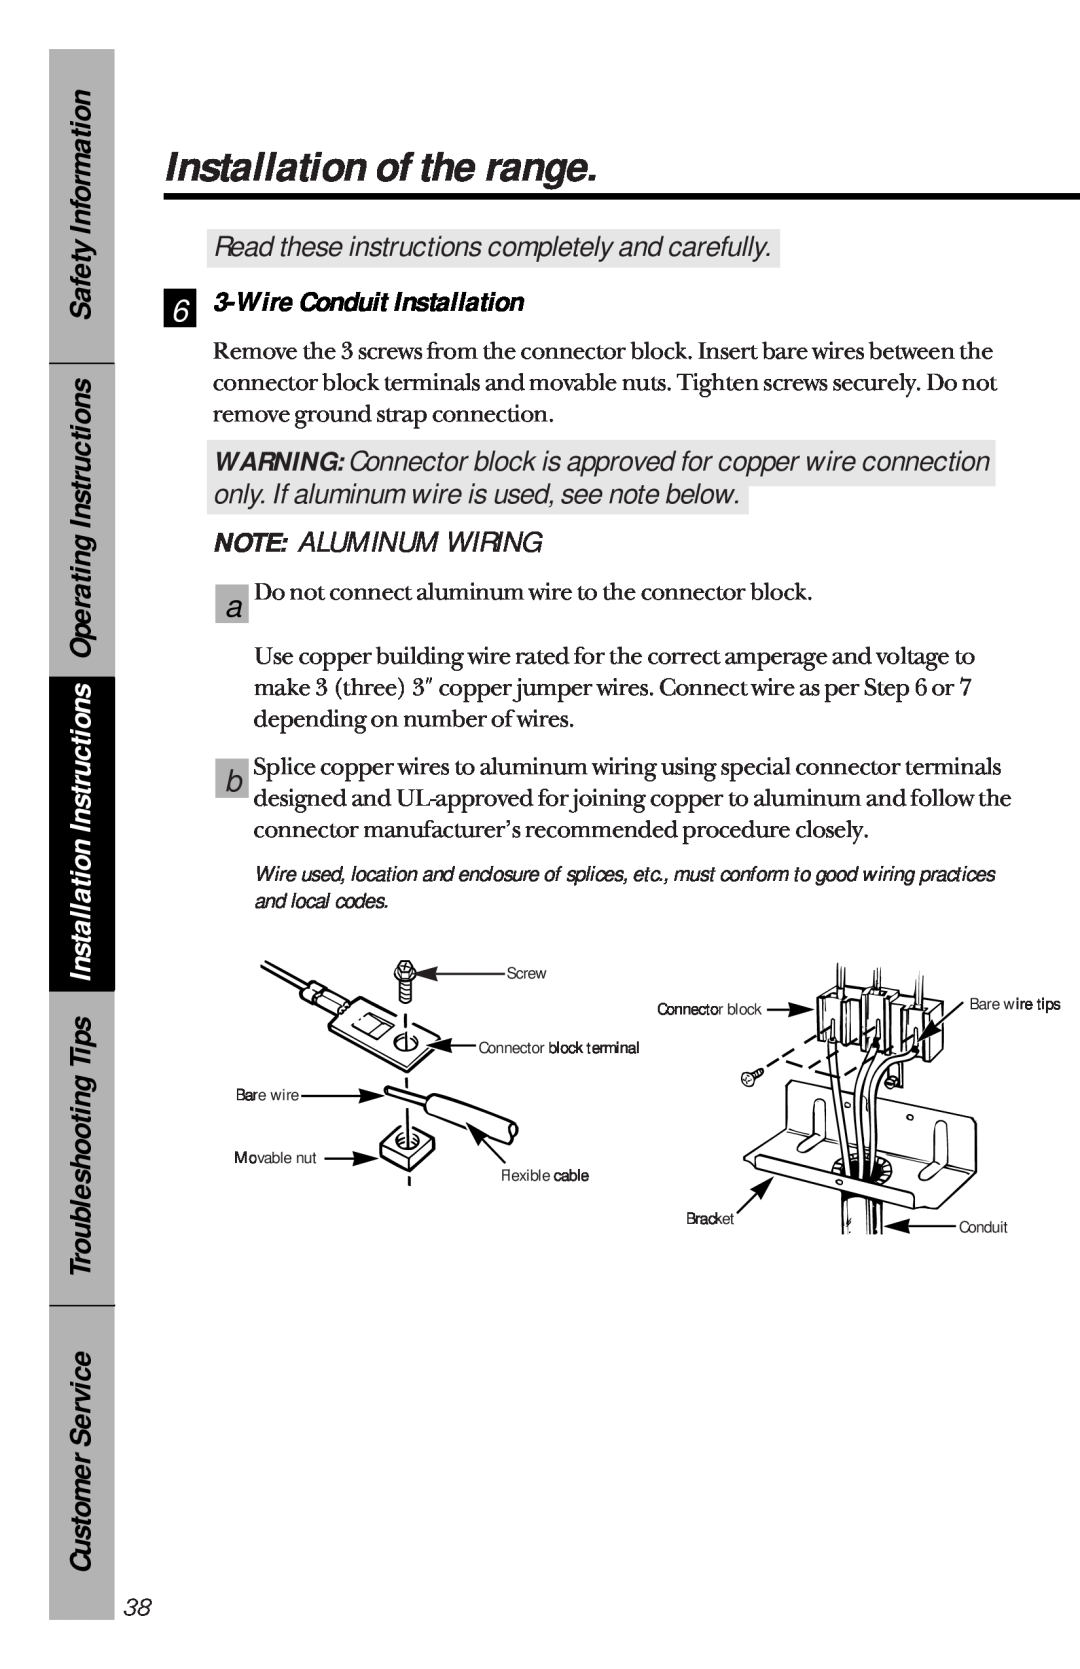 GE 164D3333P150 owner manual 6 3-Wire Conduit Installation, Note Aluminum Wiring, Installation of the range 